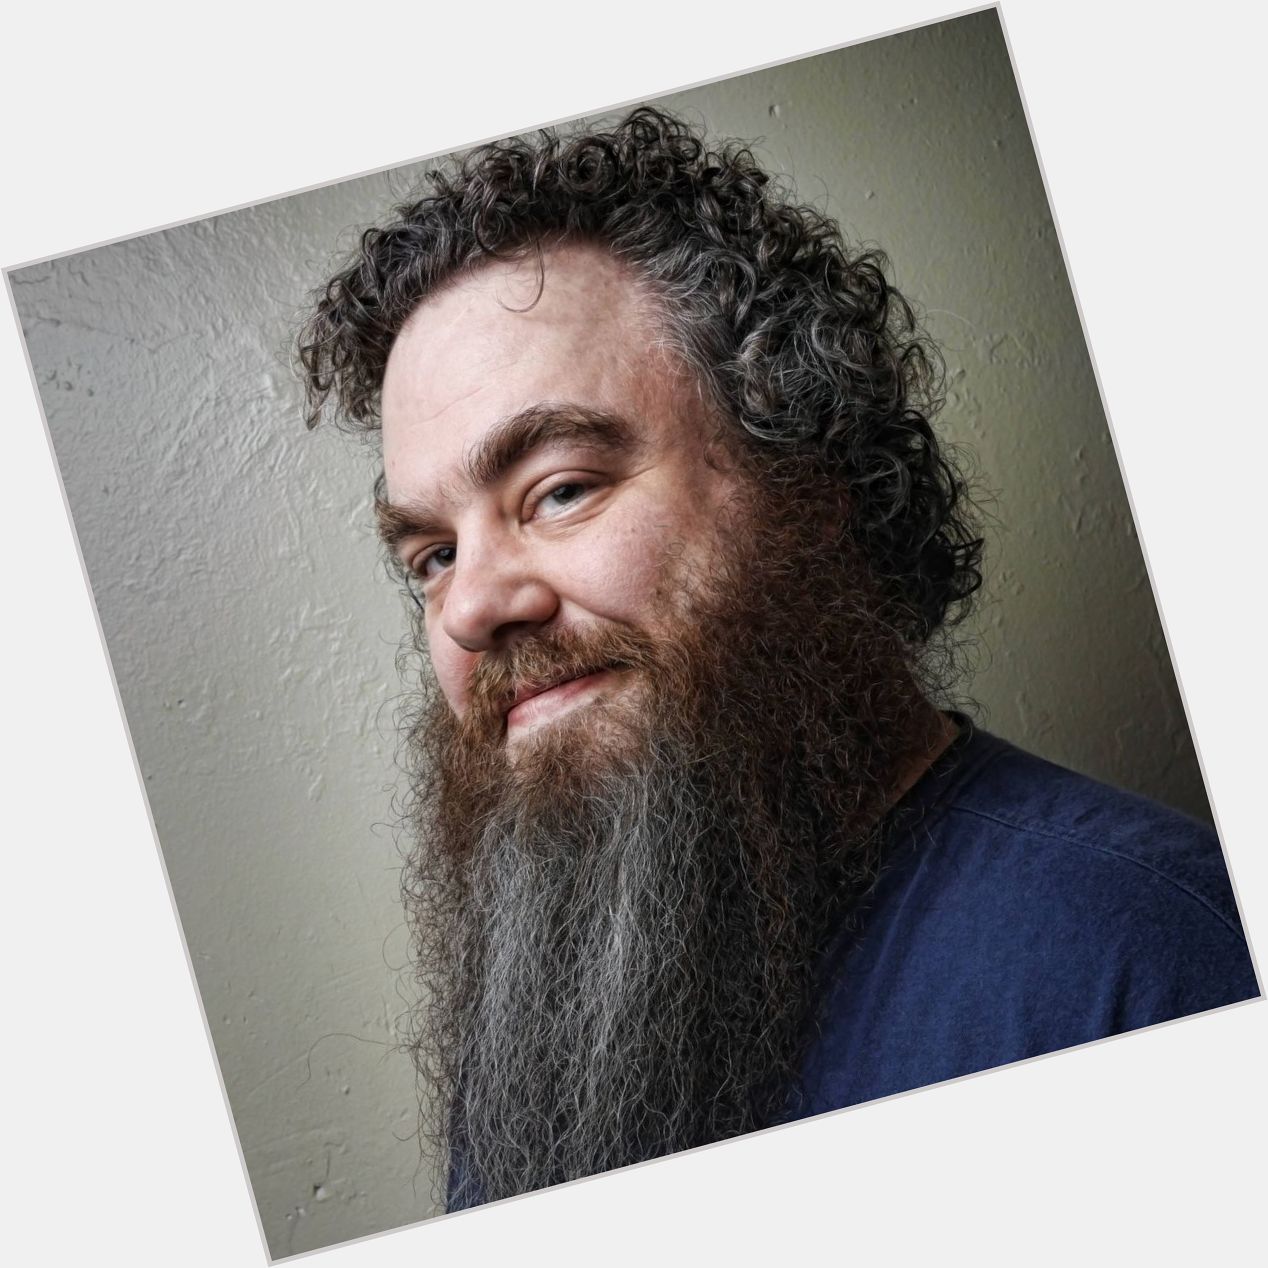 who is Patrick Rothfuss 8